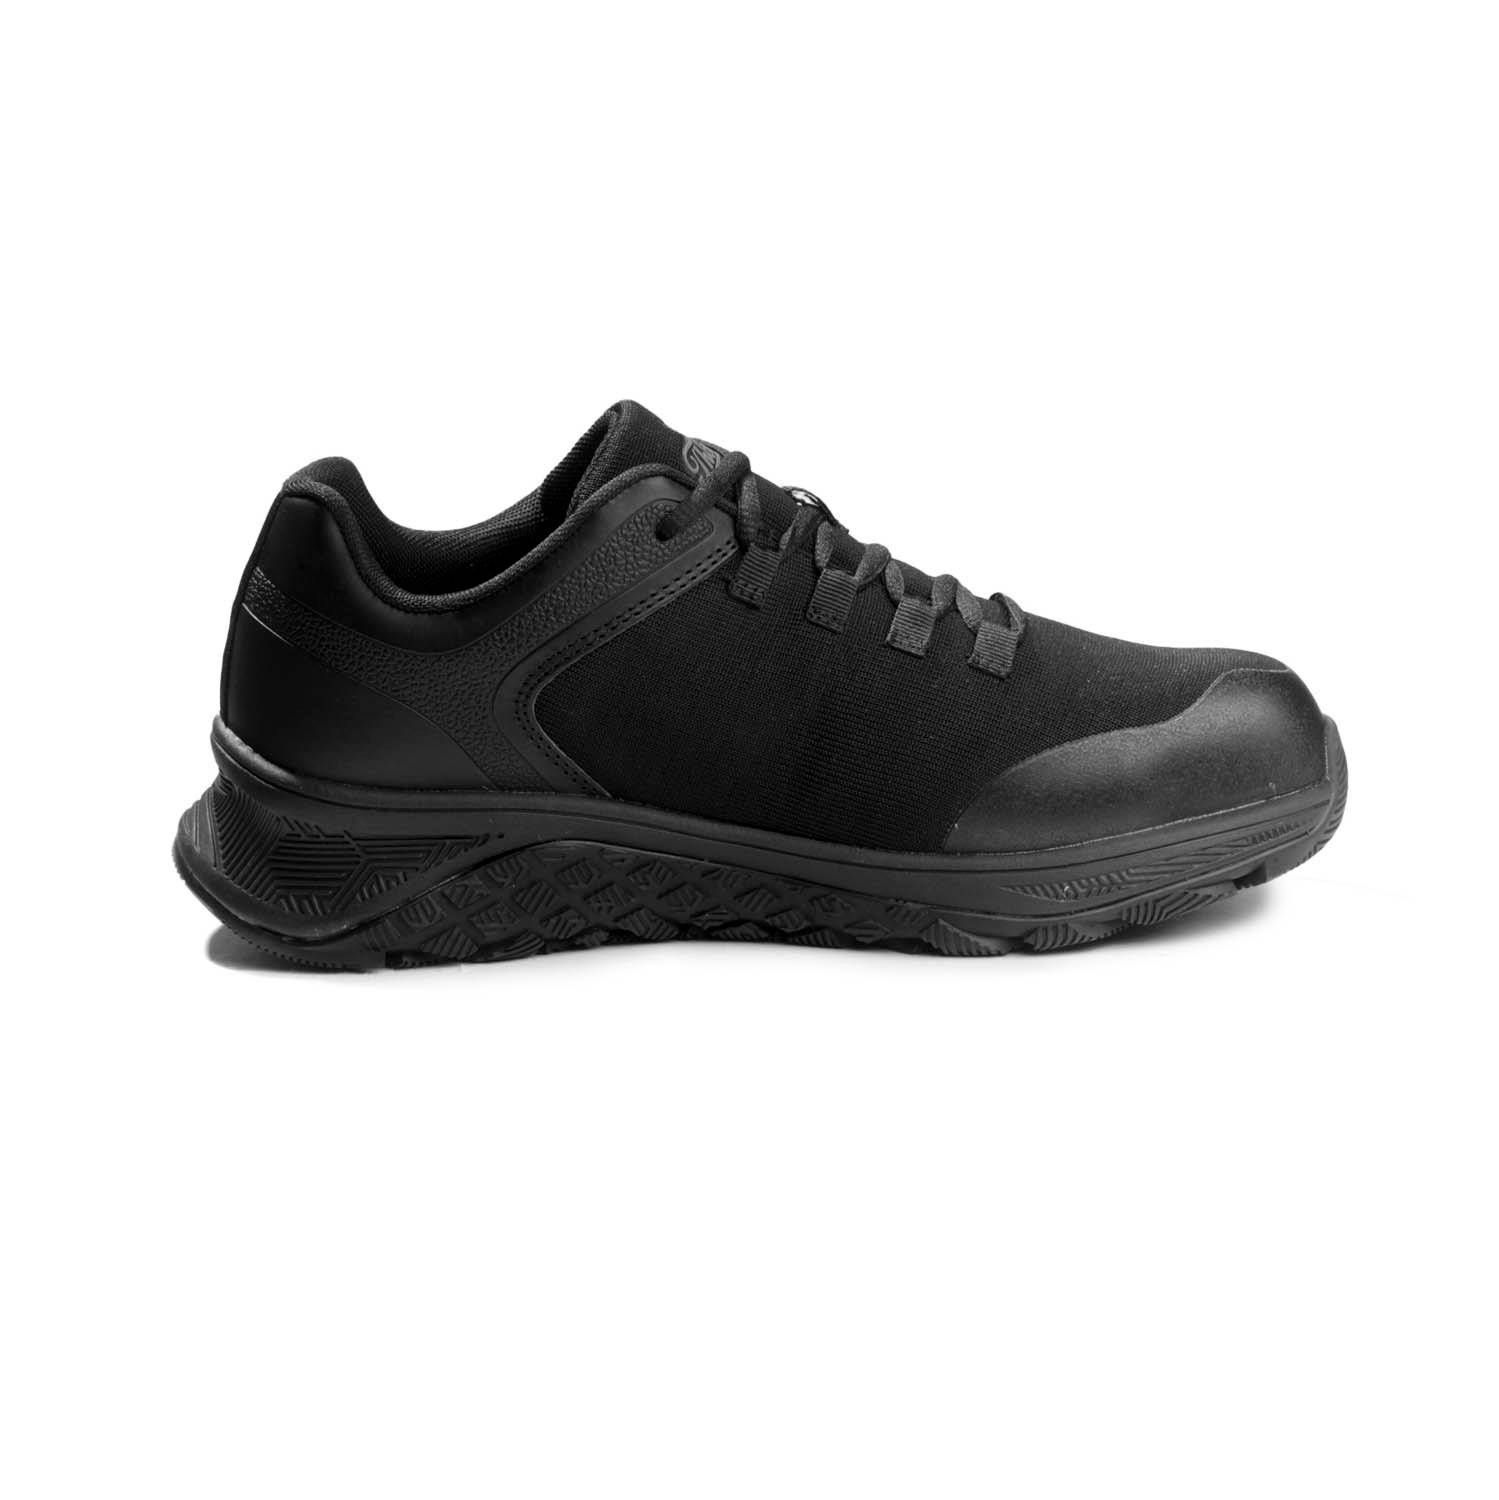 Thorogood T800 Low Composite Toe Oxfords | Safety Toe Shoes